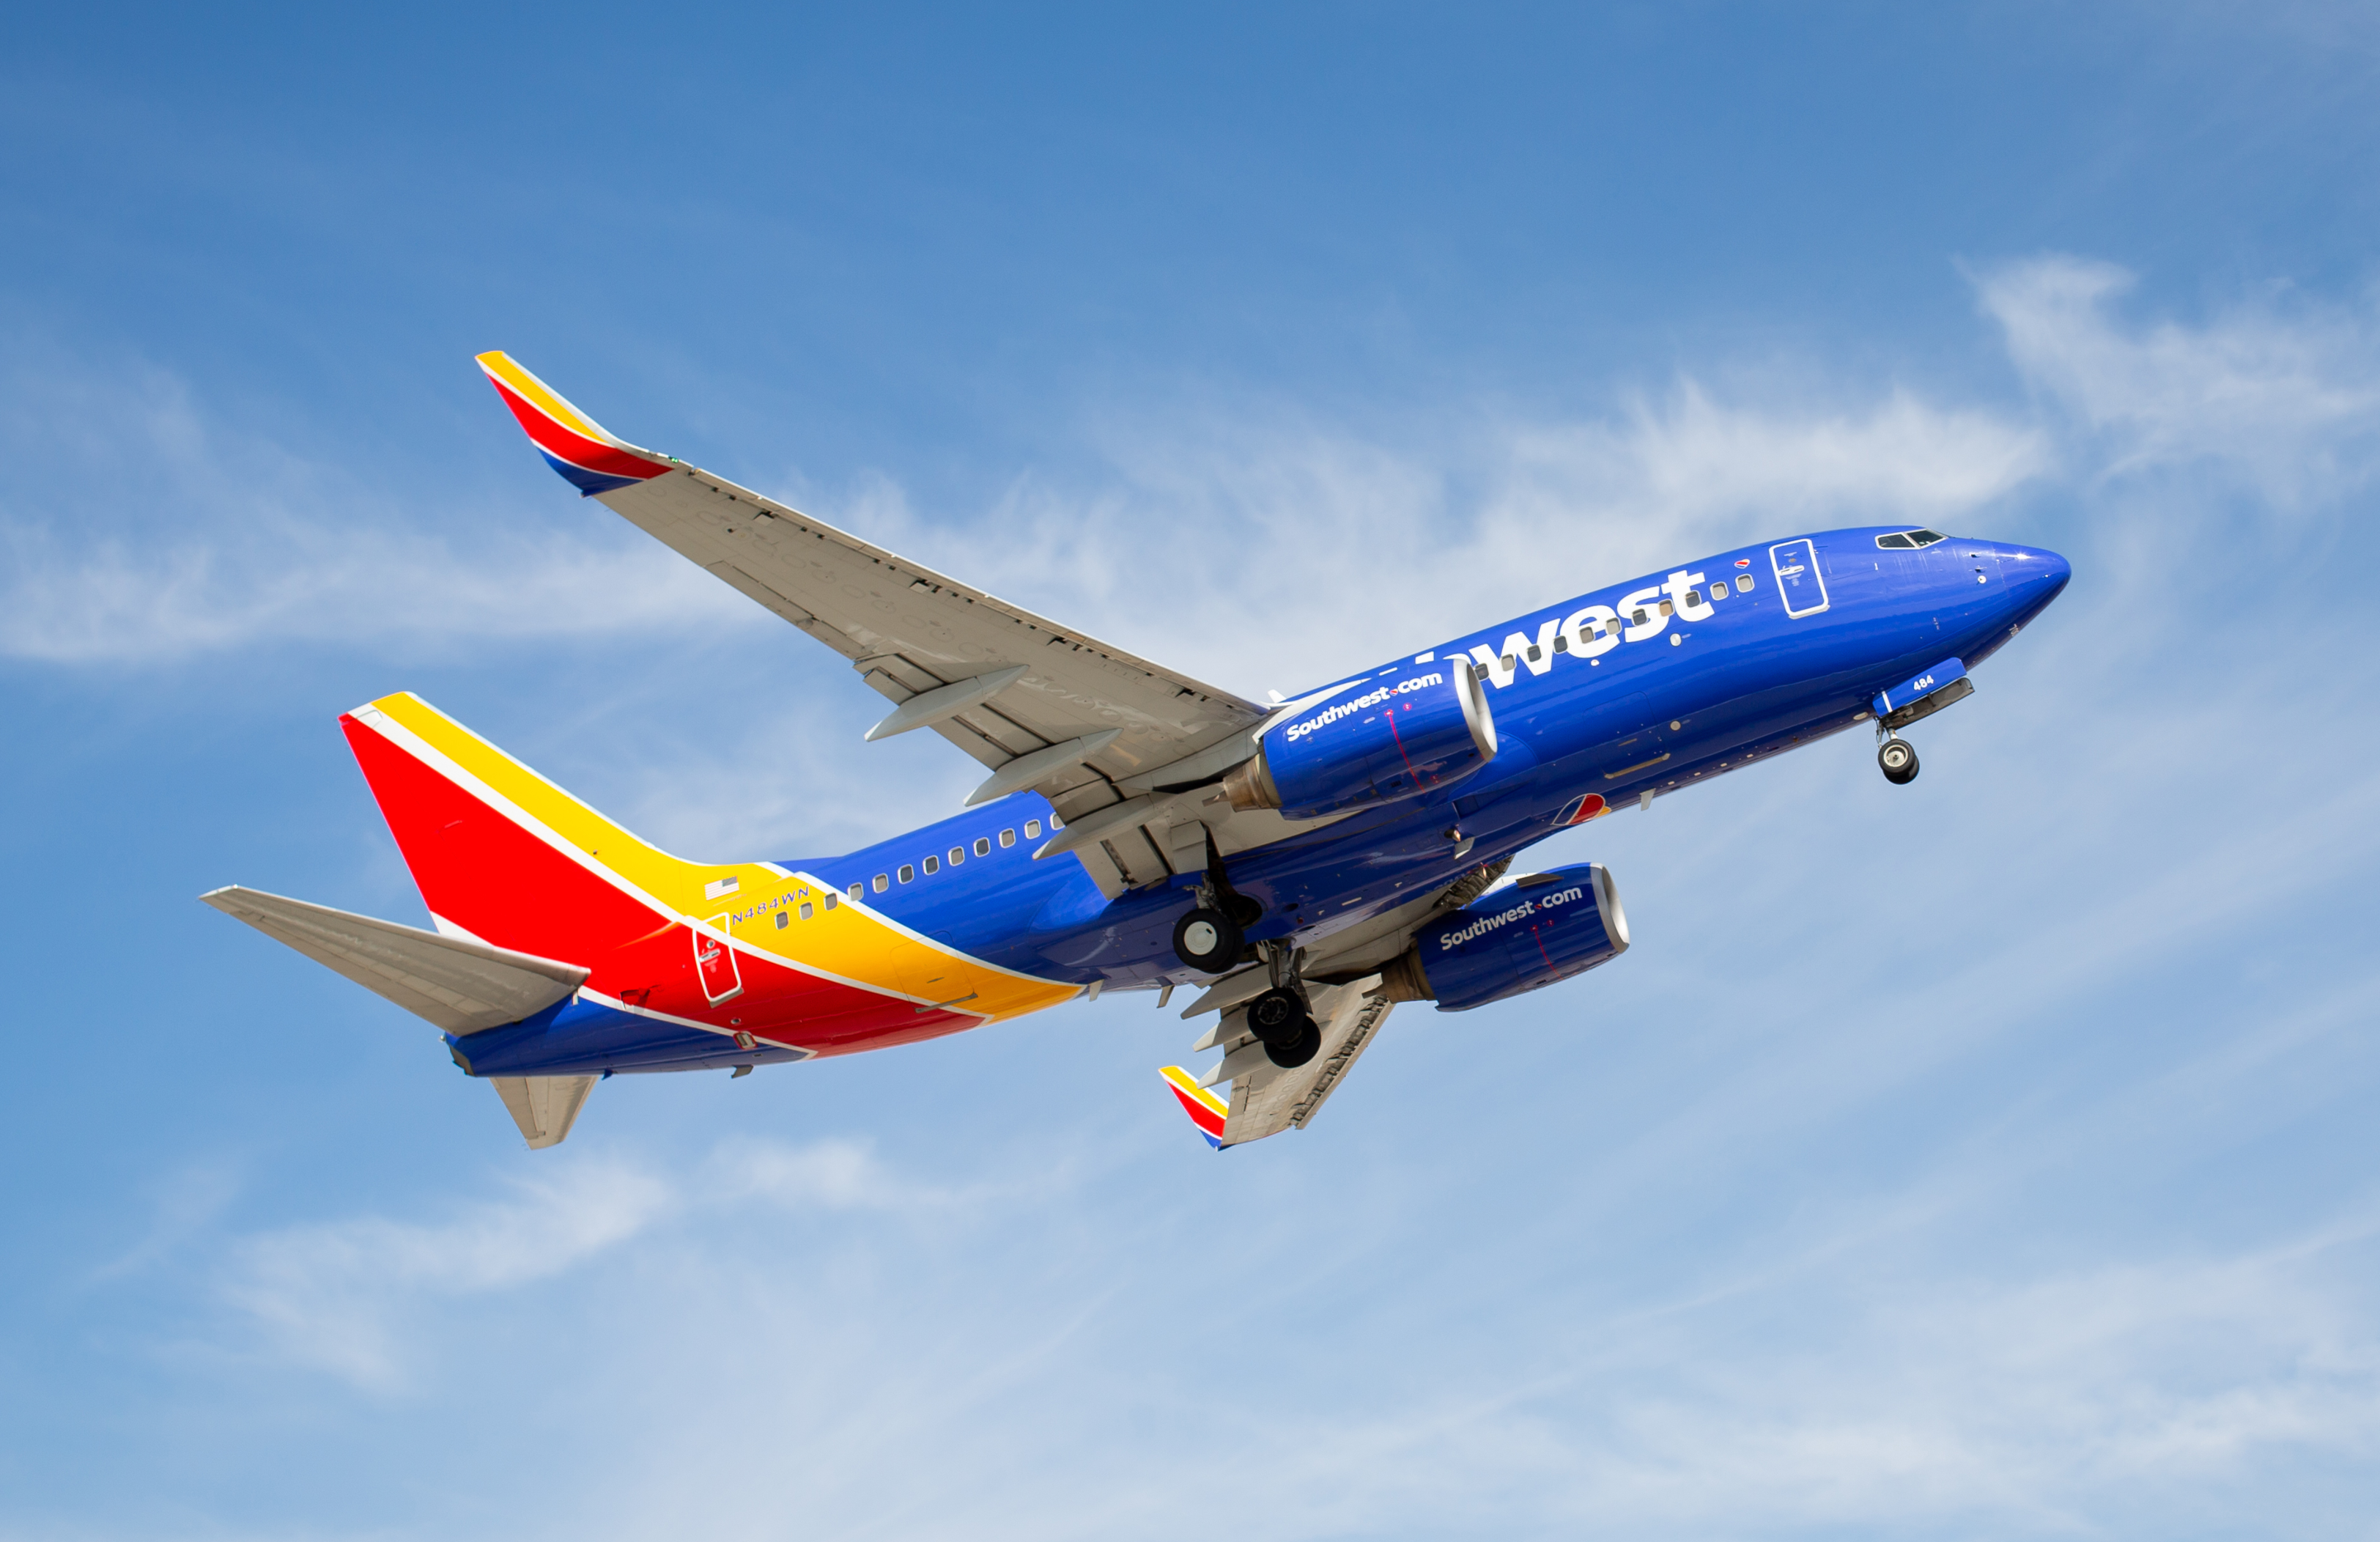 Southwest Airlines Boeing 737 Taking Off